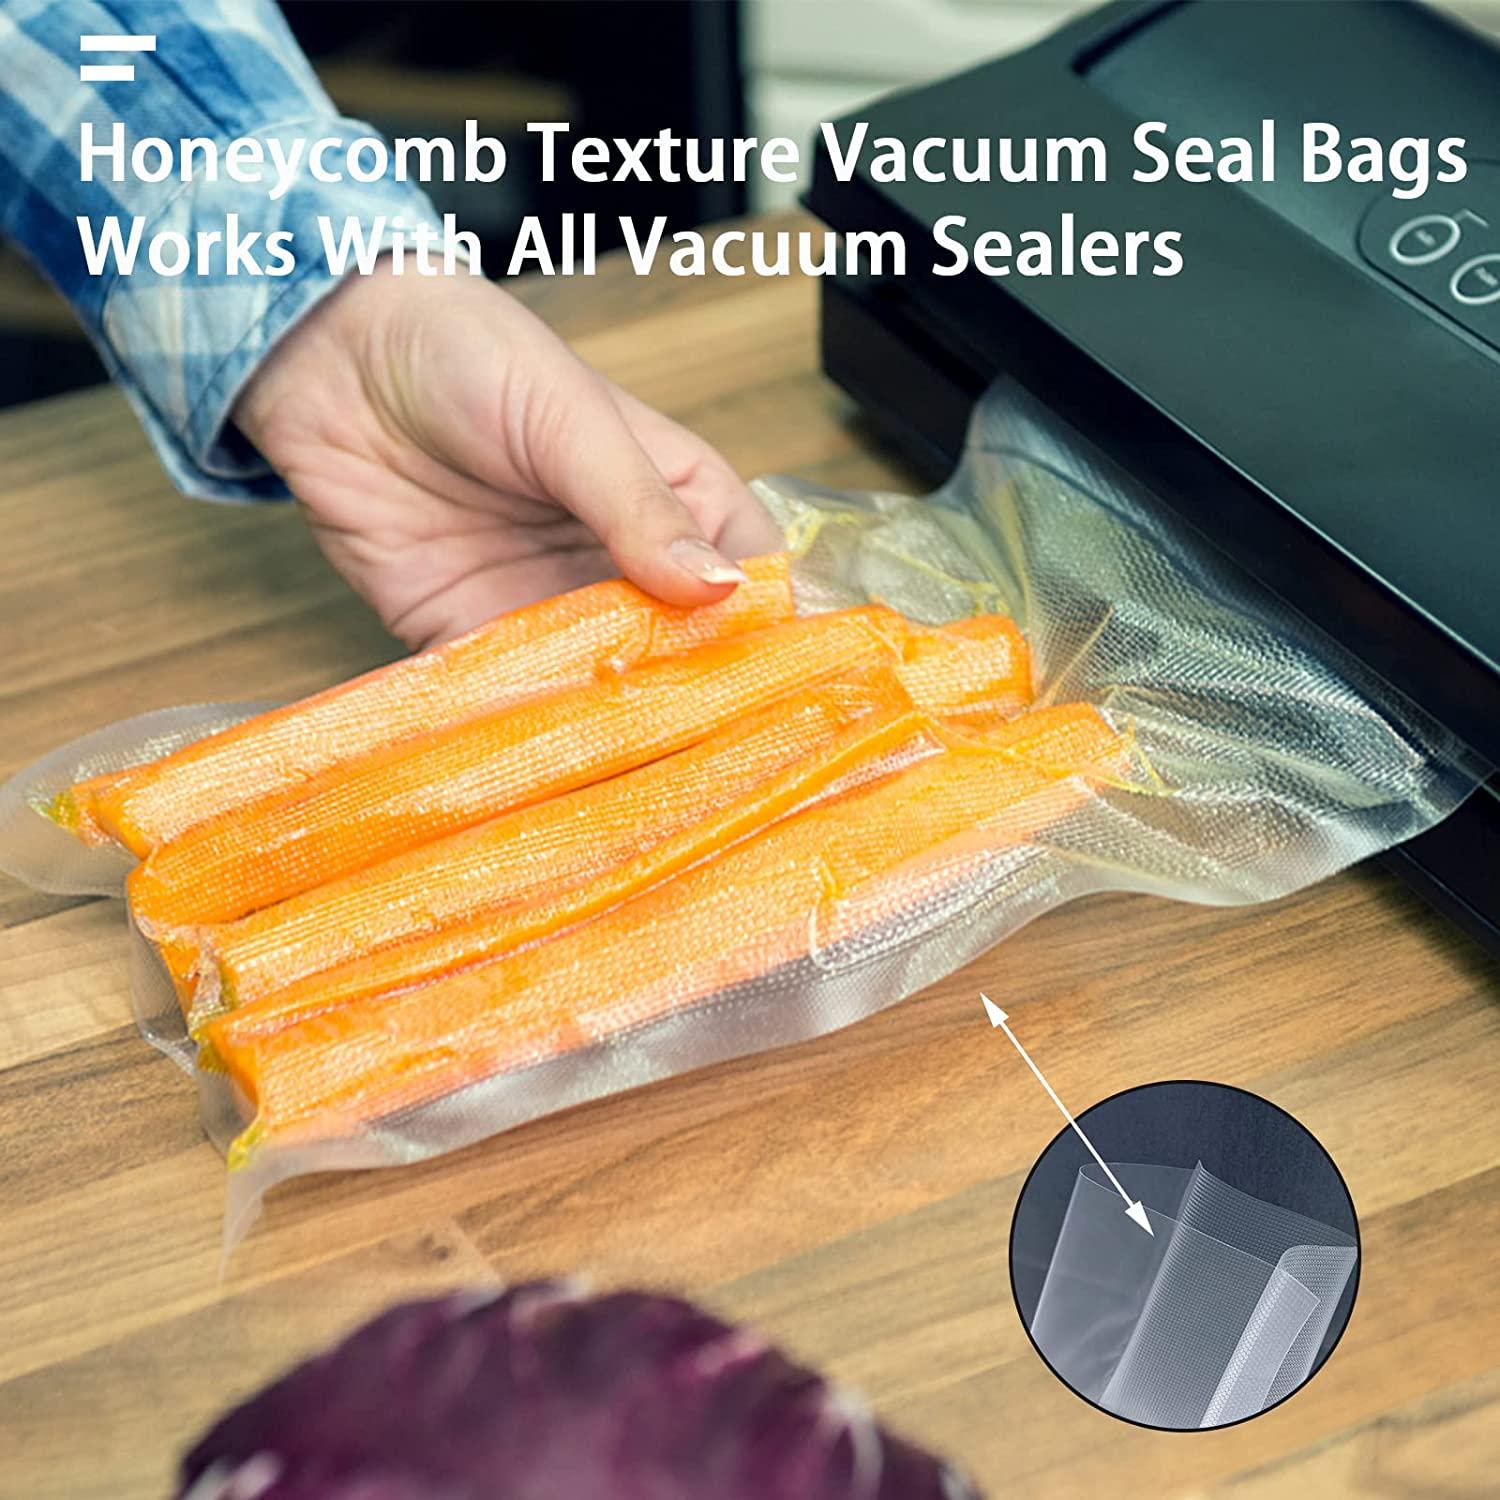 6 x 100' Mega Roll & Cutter Box Vacuum Sealer Bags Roll (No More Scissors) 4 Mil 100 Foot OutOfAir, 33% Thicker, BPA Free, Sous Vide, Commercial